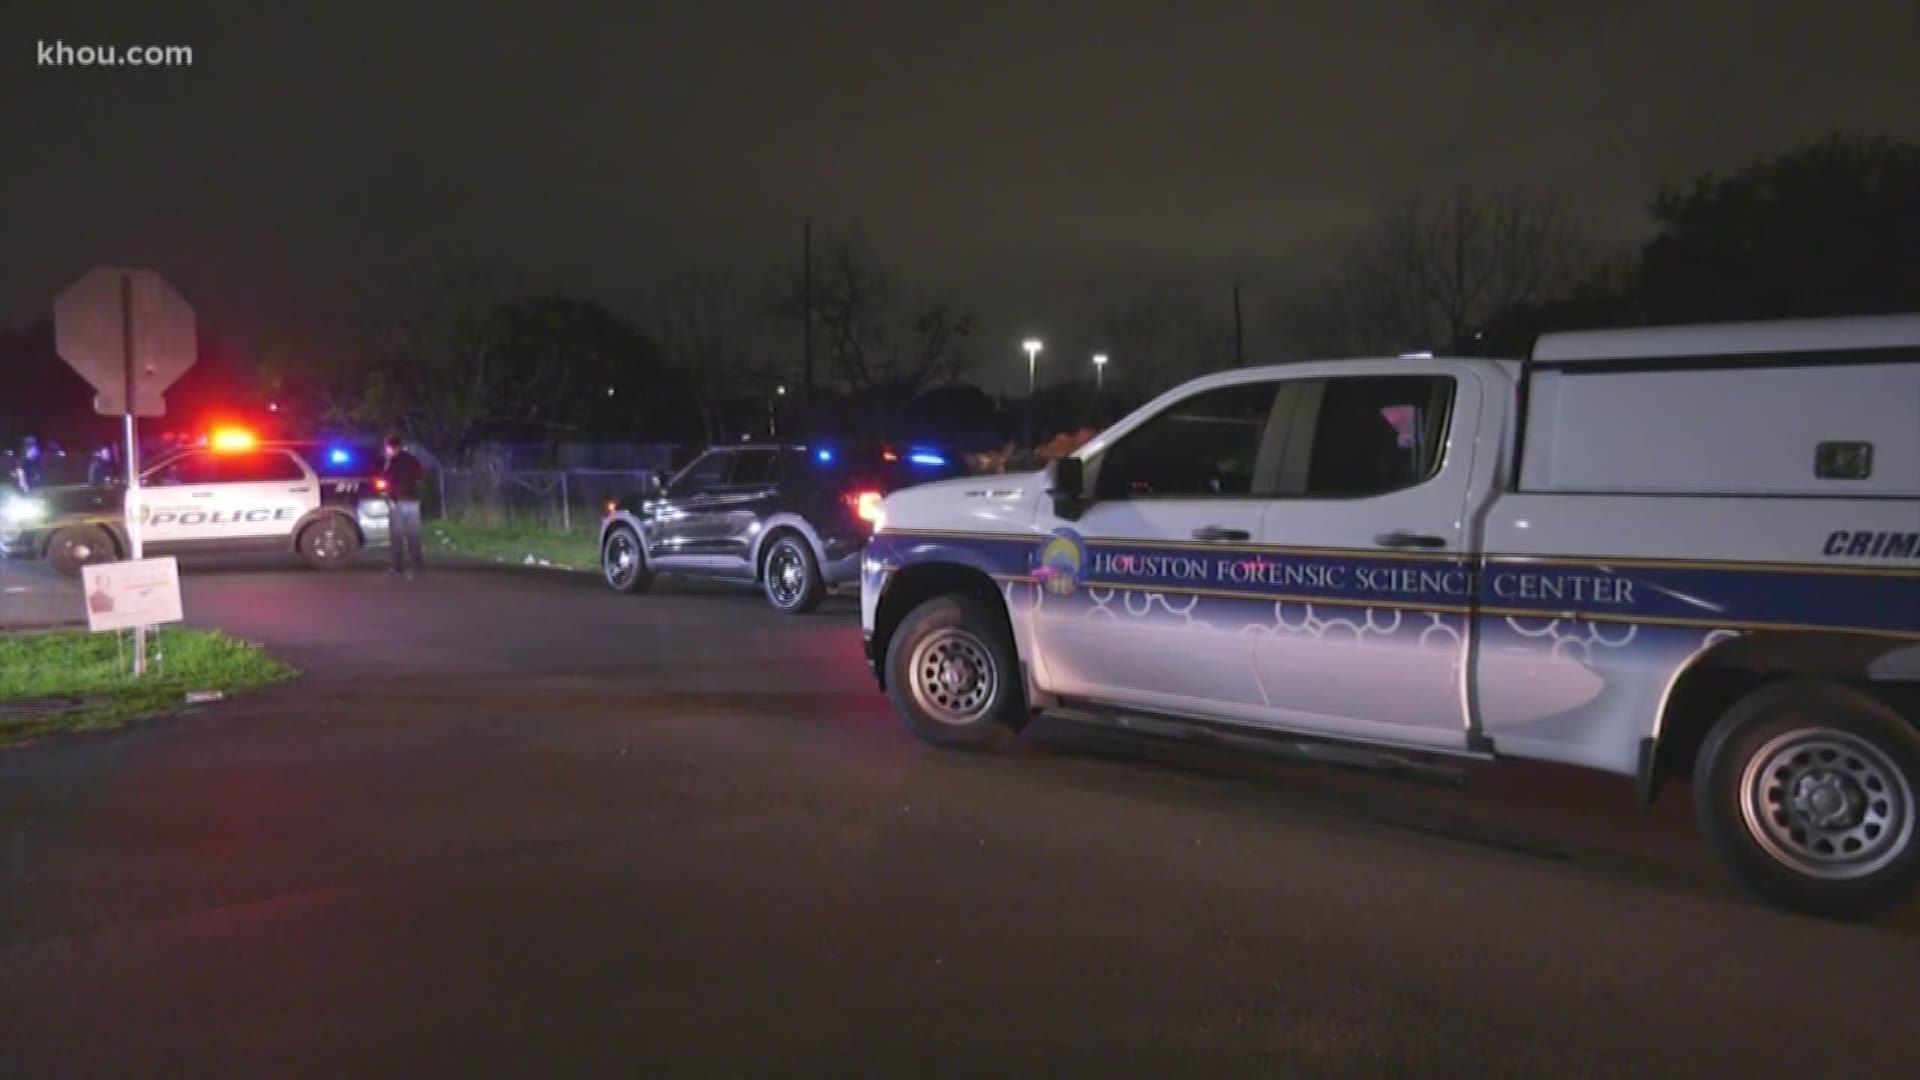 Two undercover officers said they were fired at after following a suspicious vehicle into south Houston.